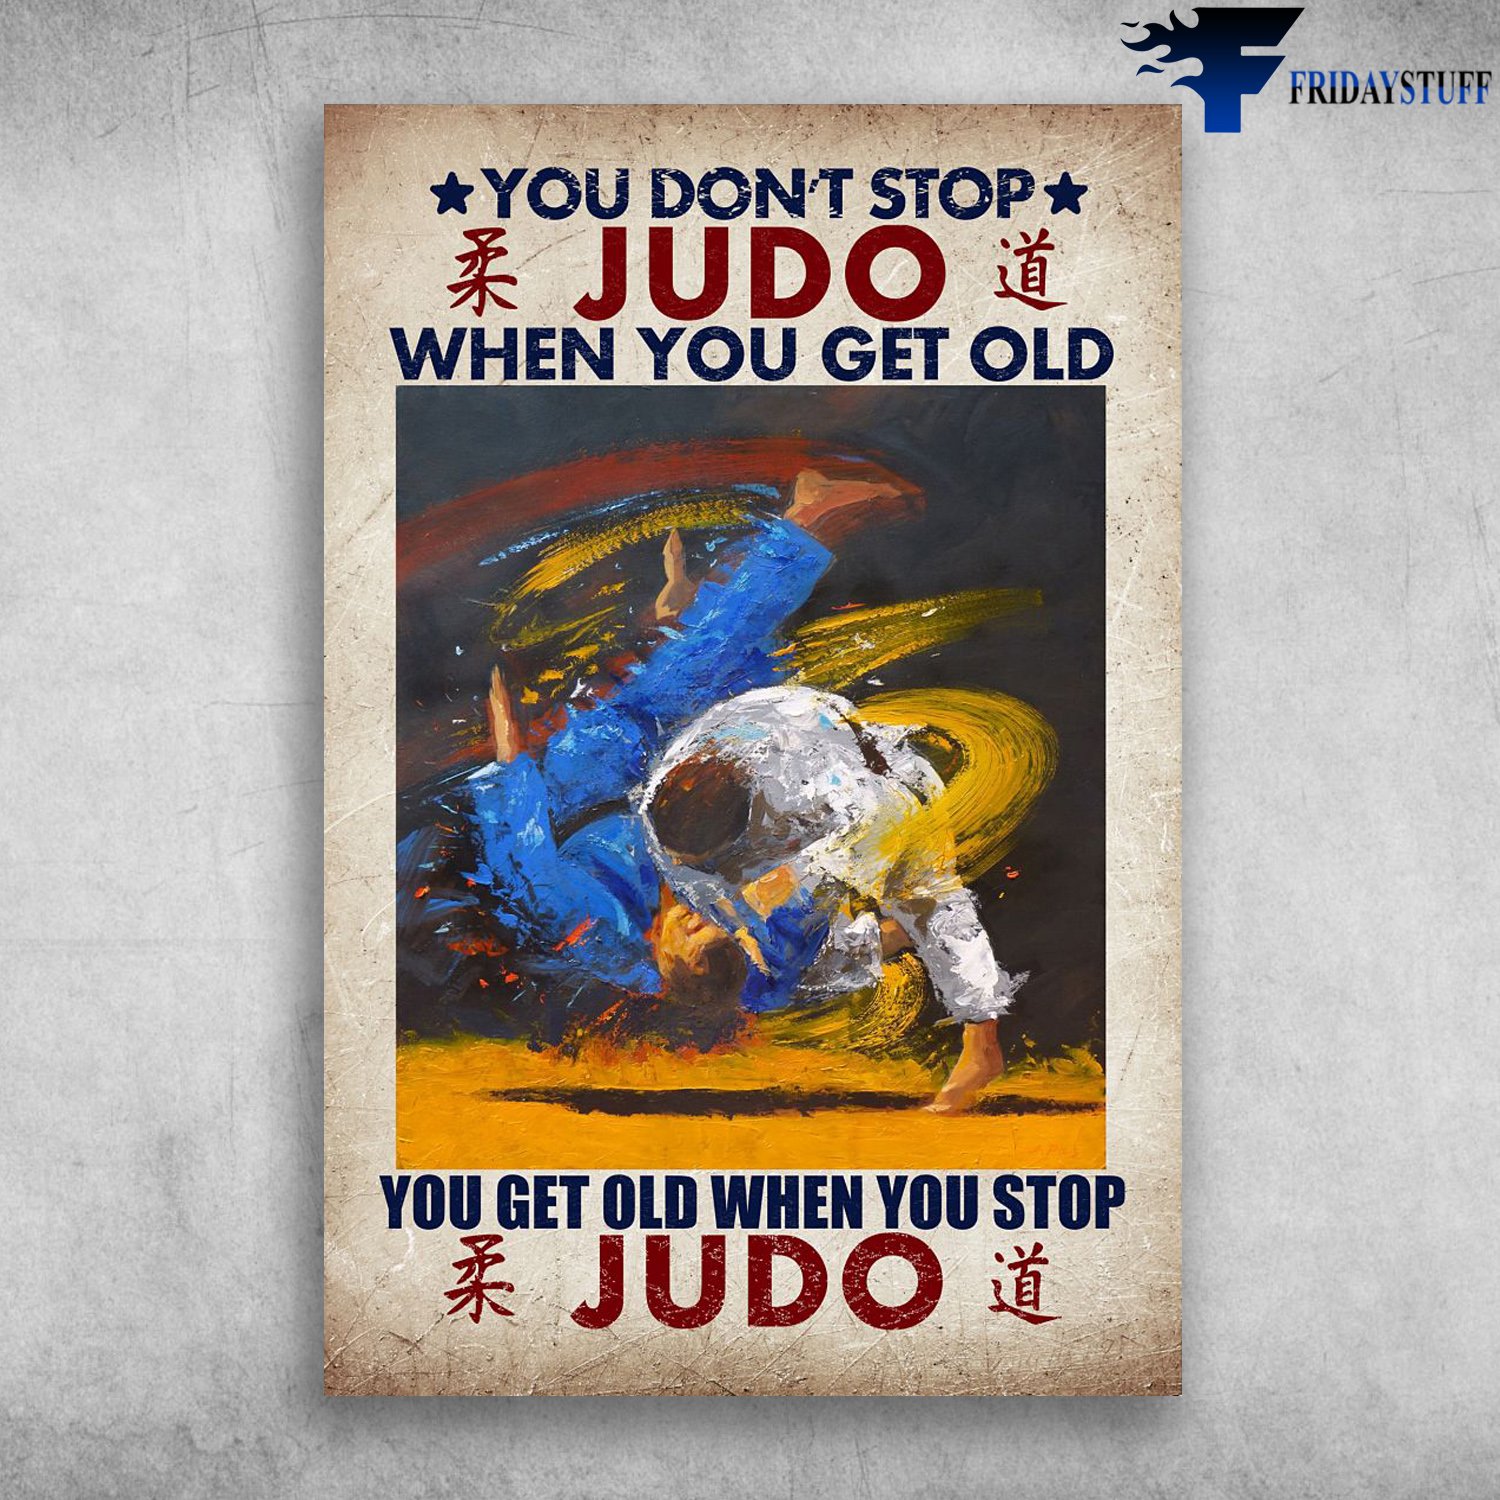 Man Judo - You Don't Stop Judo When You Get Old, You Get Old When You Stop Judo